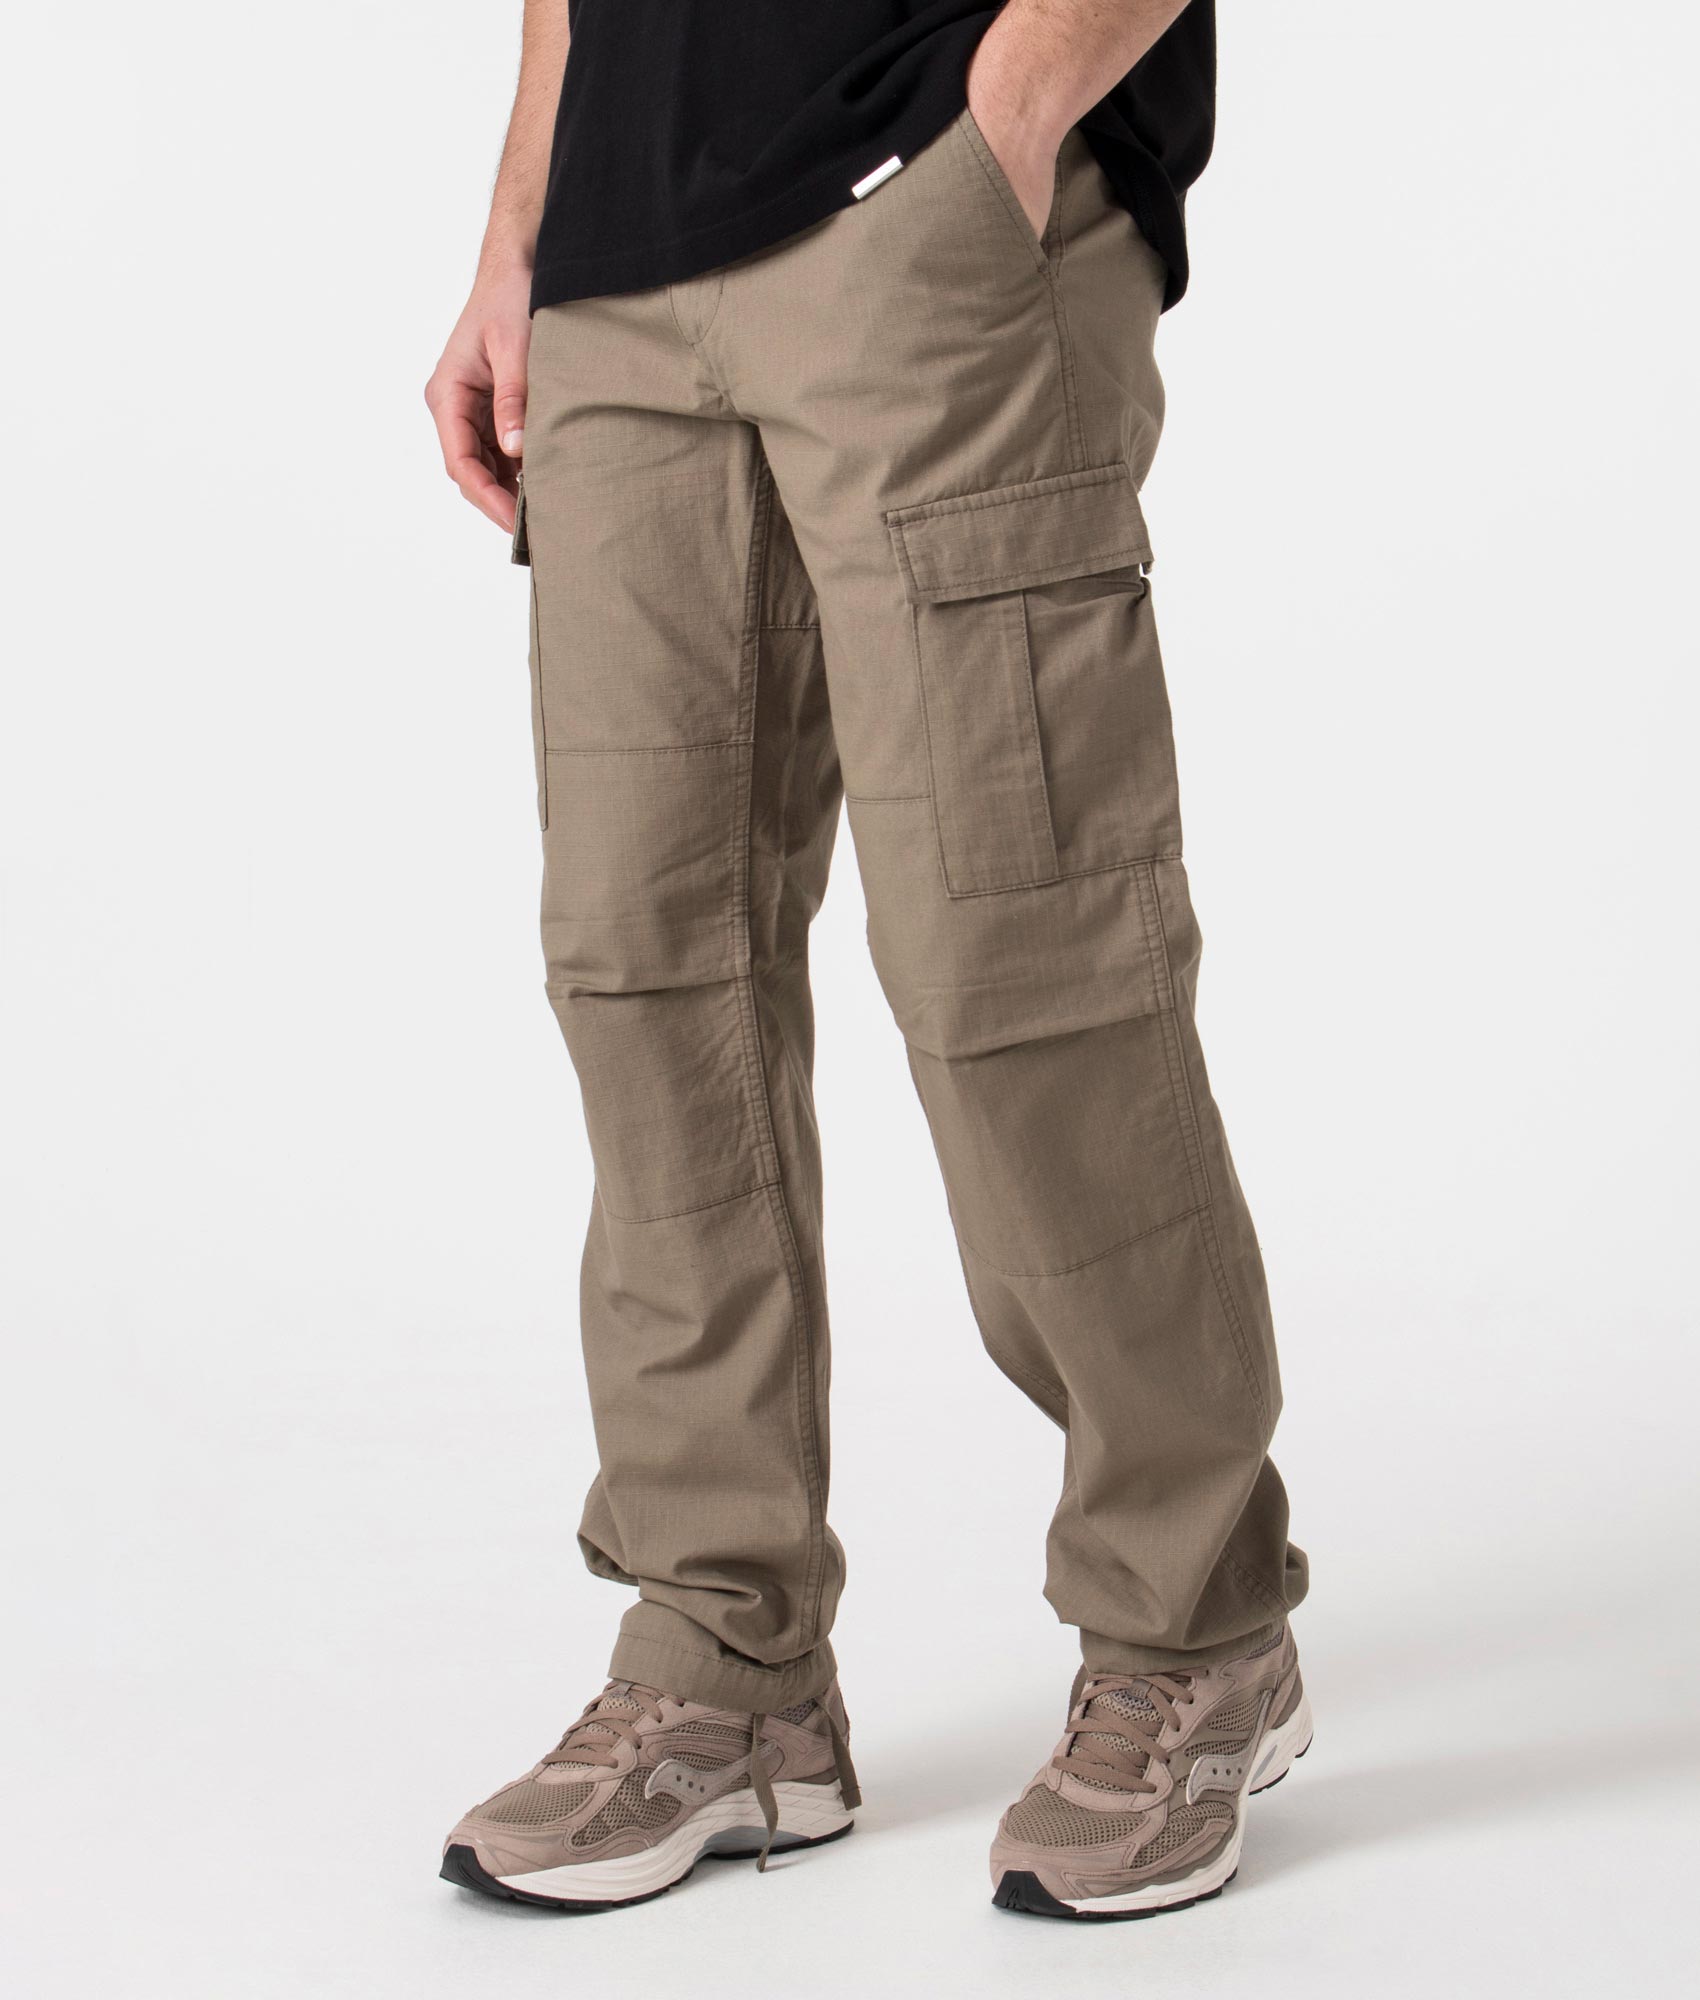 Carhartt WIP Mens Regular Fit Aviation Pant - Colour: 1YJ02 Branch - Size: 34R